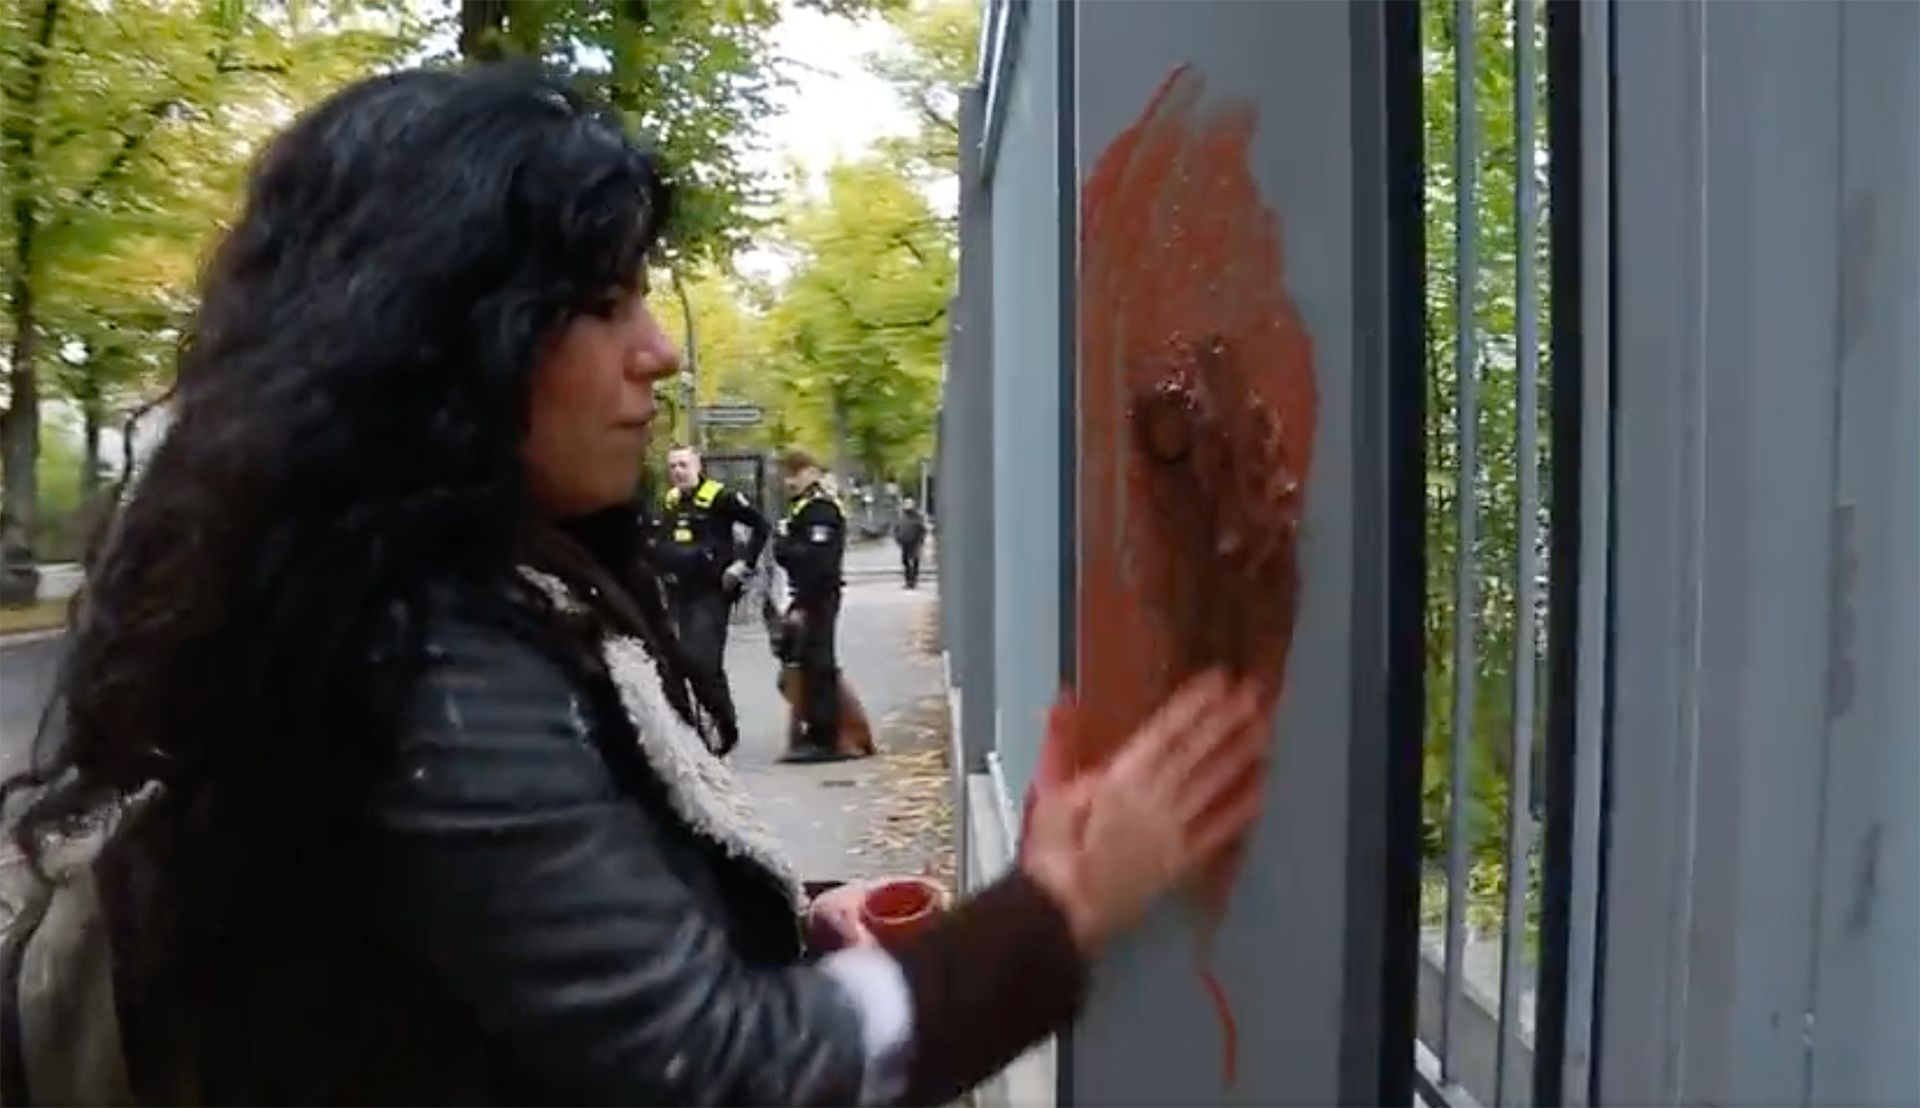 Artist Zehra Doğan stages a protest performance at the Iranian embassy in Berlin against the death of Mahsa Amini Screenshot via Twitter